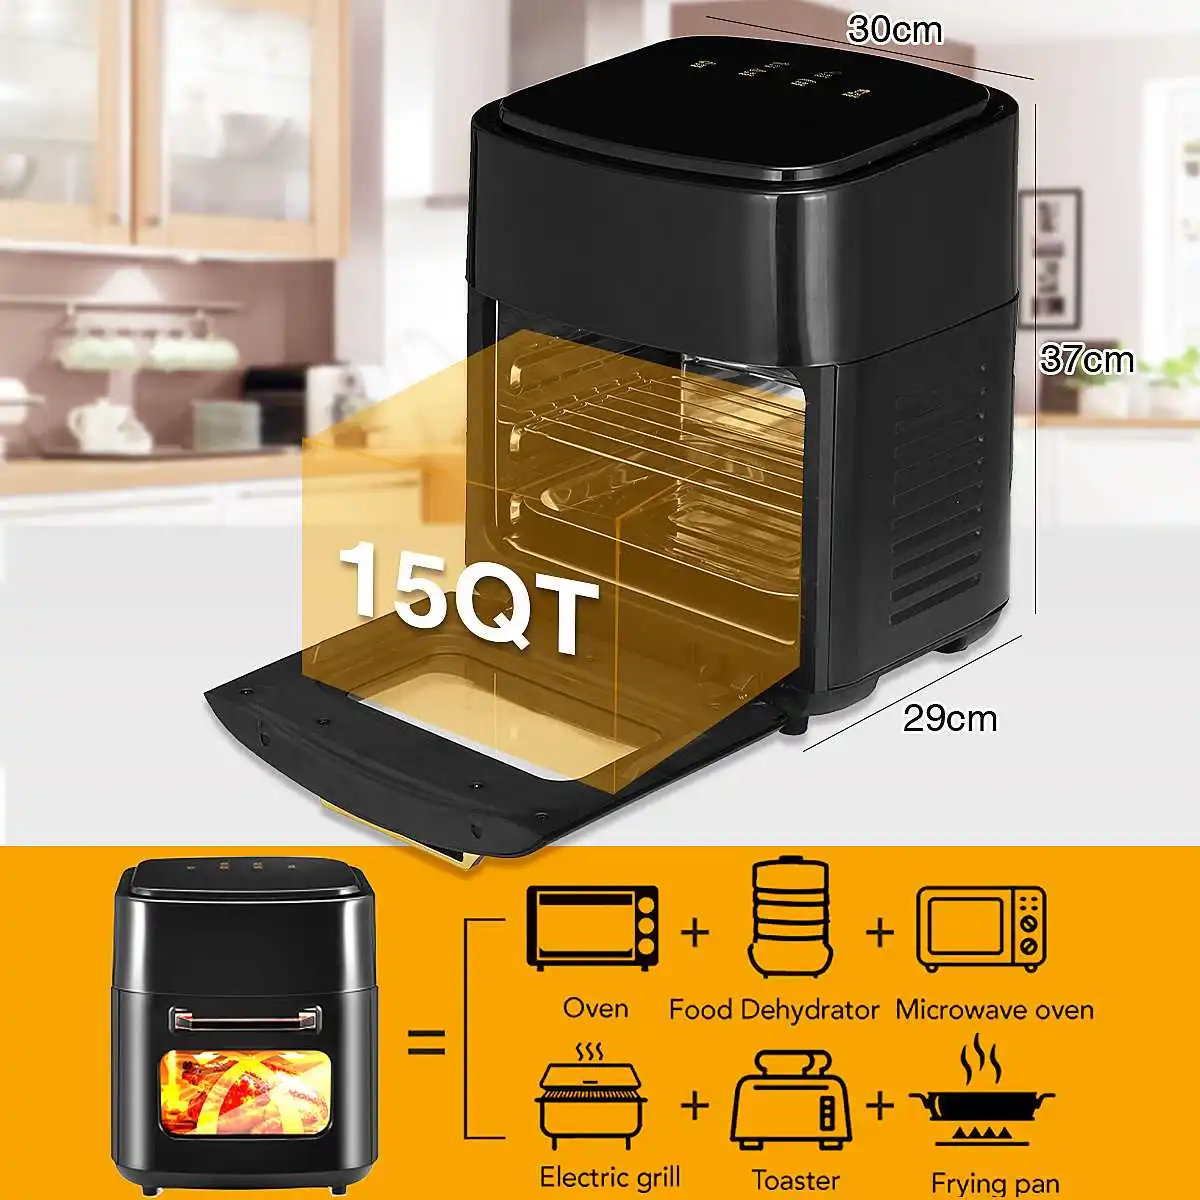 https://ae01.alicdn.com/kf/Sd483faed6cff436d8a0caaae84cef2cbz/15L-Electric-Air-Fryer-Oven-Toaster-Rotisserie-Dehydrator-1400W-LED-Touchscreen-Chicken-Frying-Machine-6-in.jpg